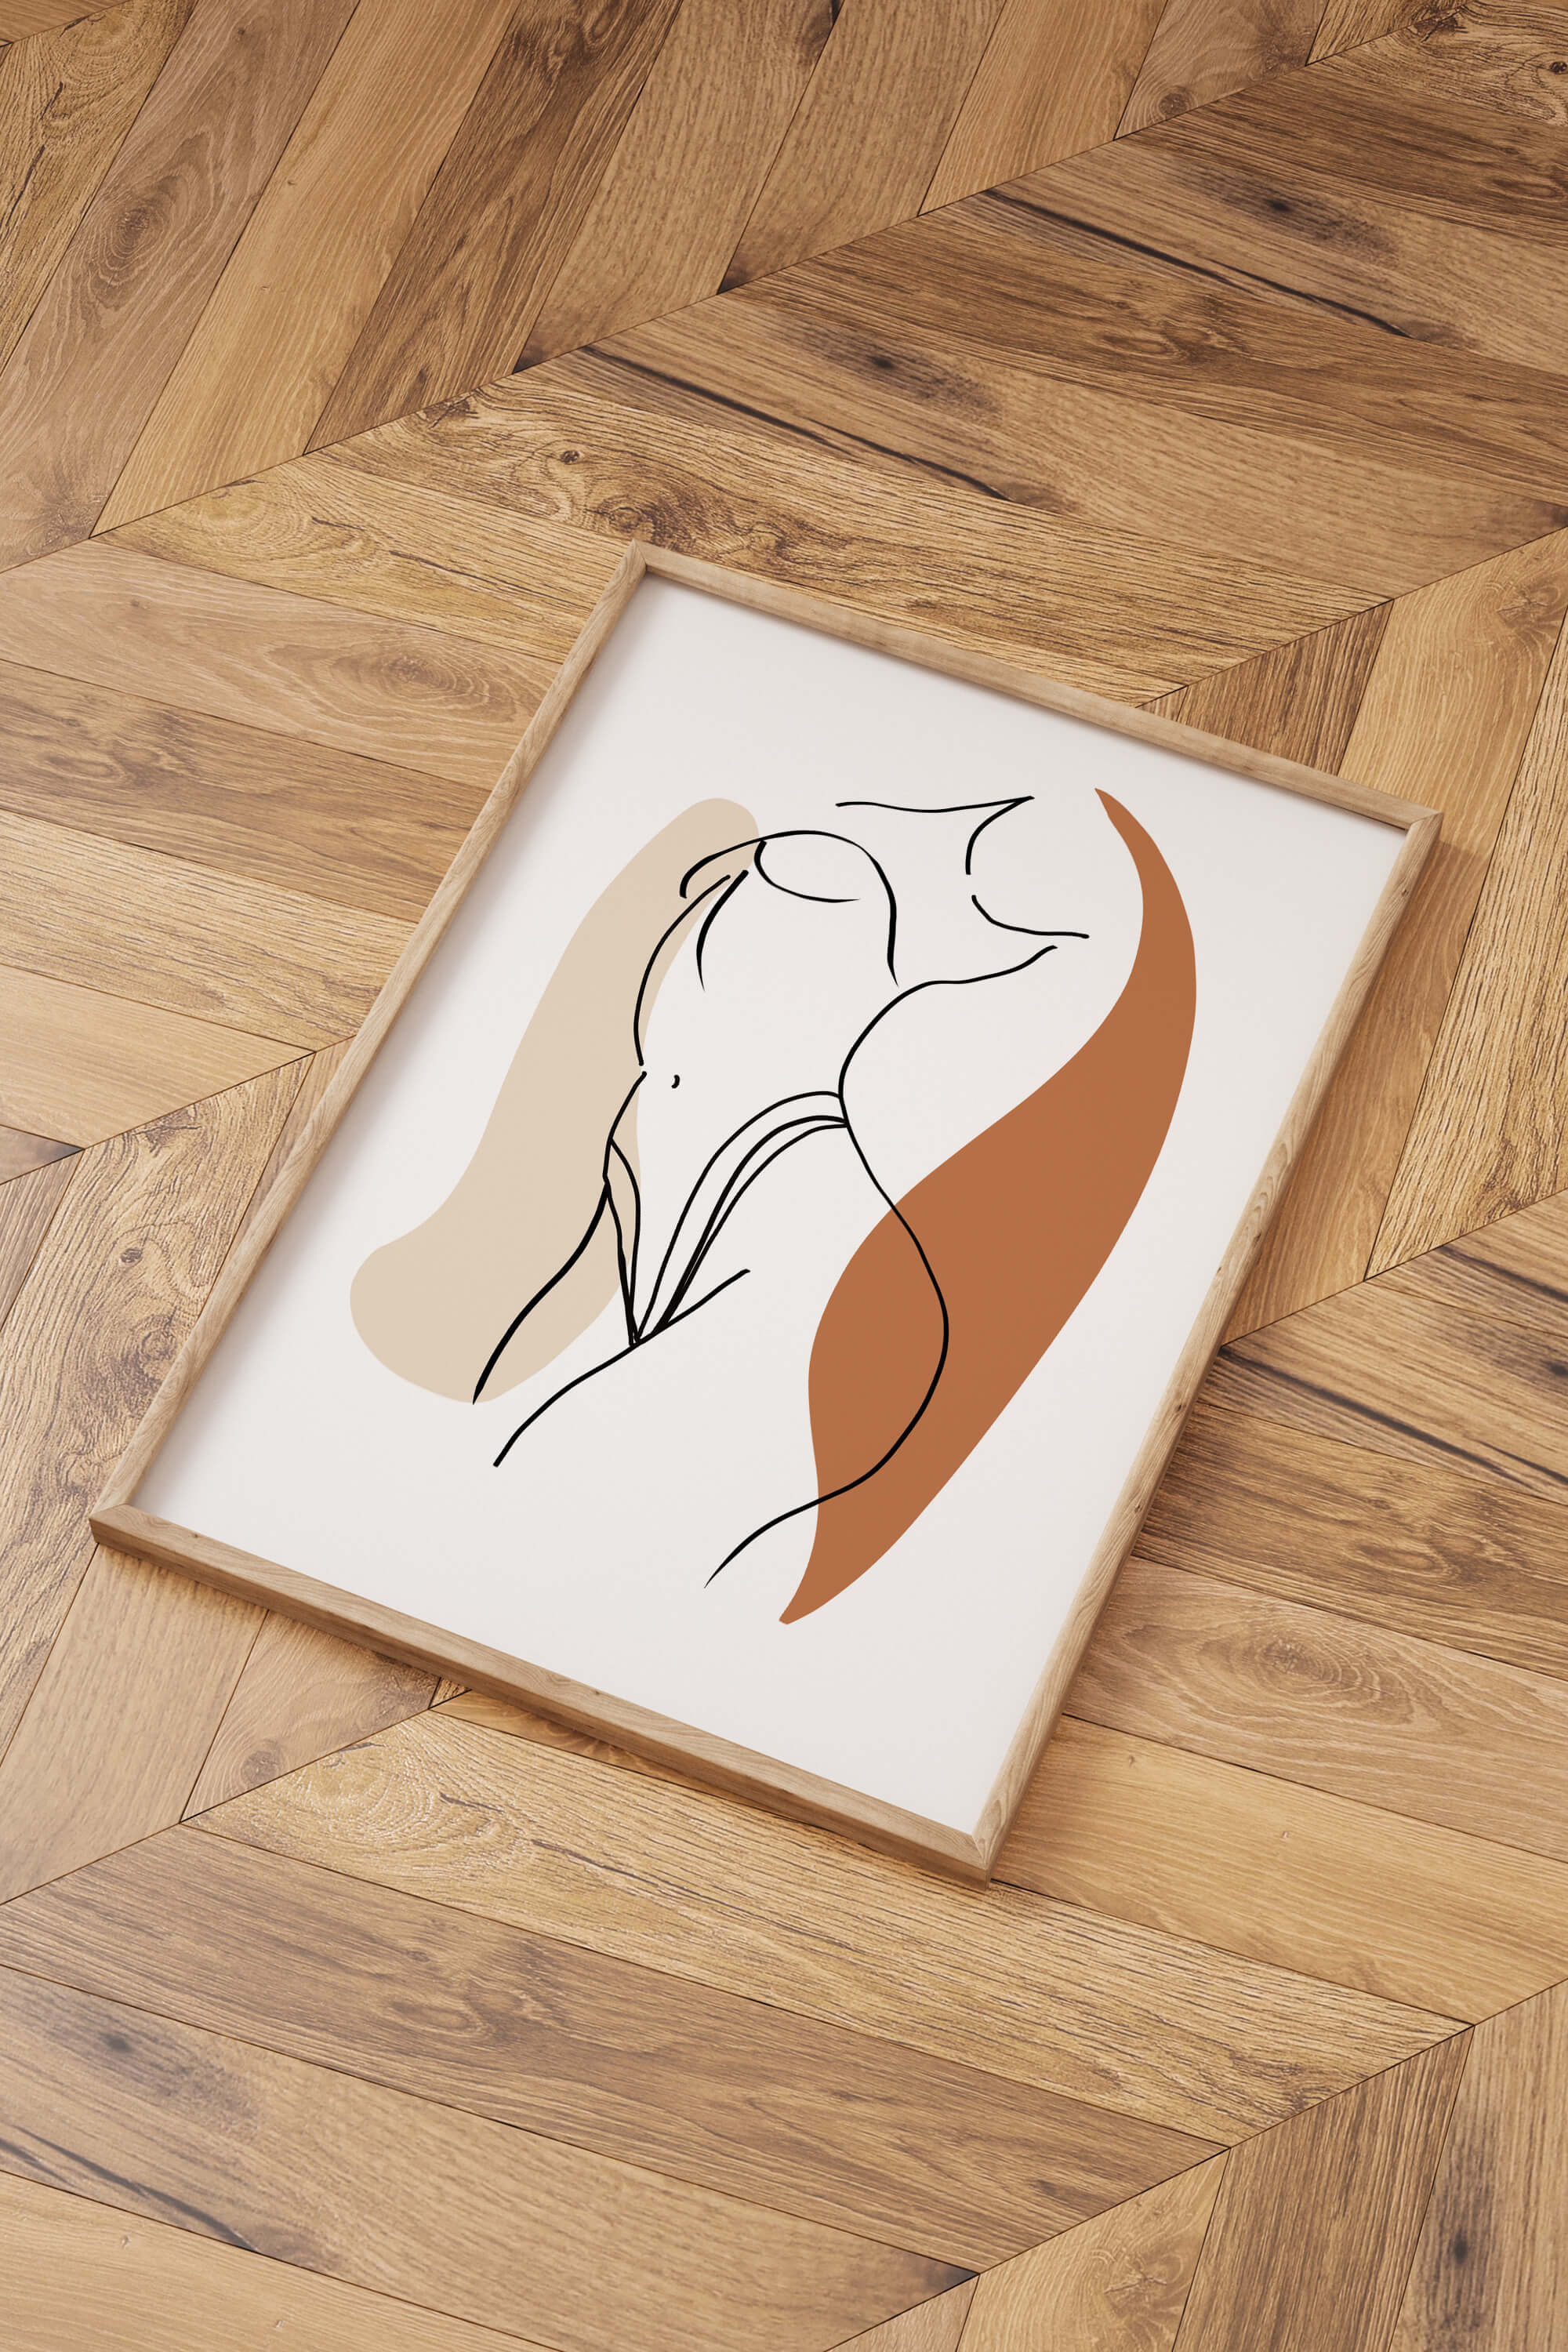 Elegant female form art print, a stylish and modern accent for home interior decorations.